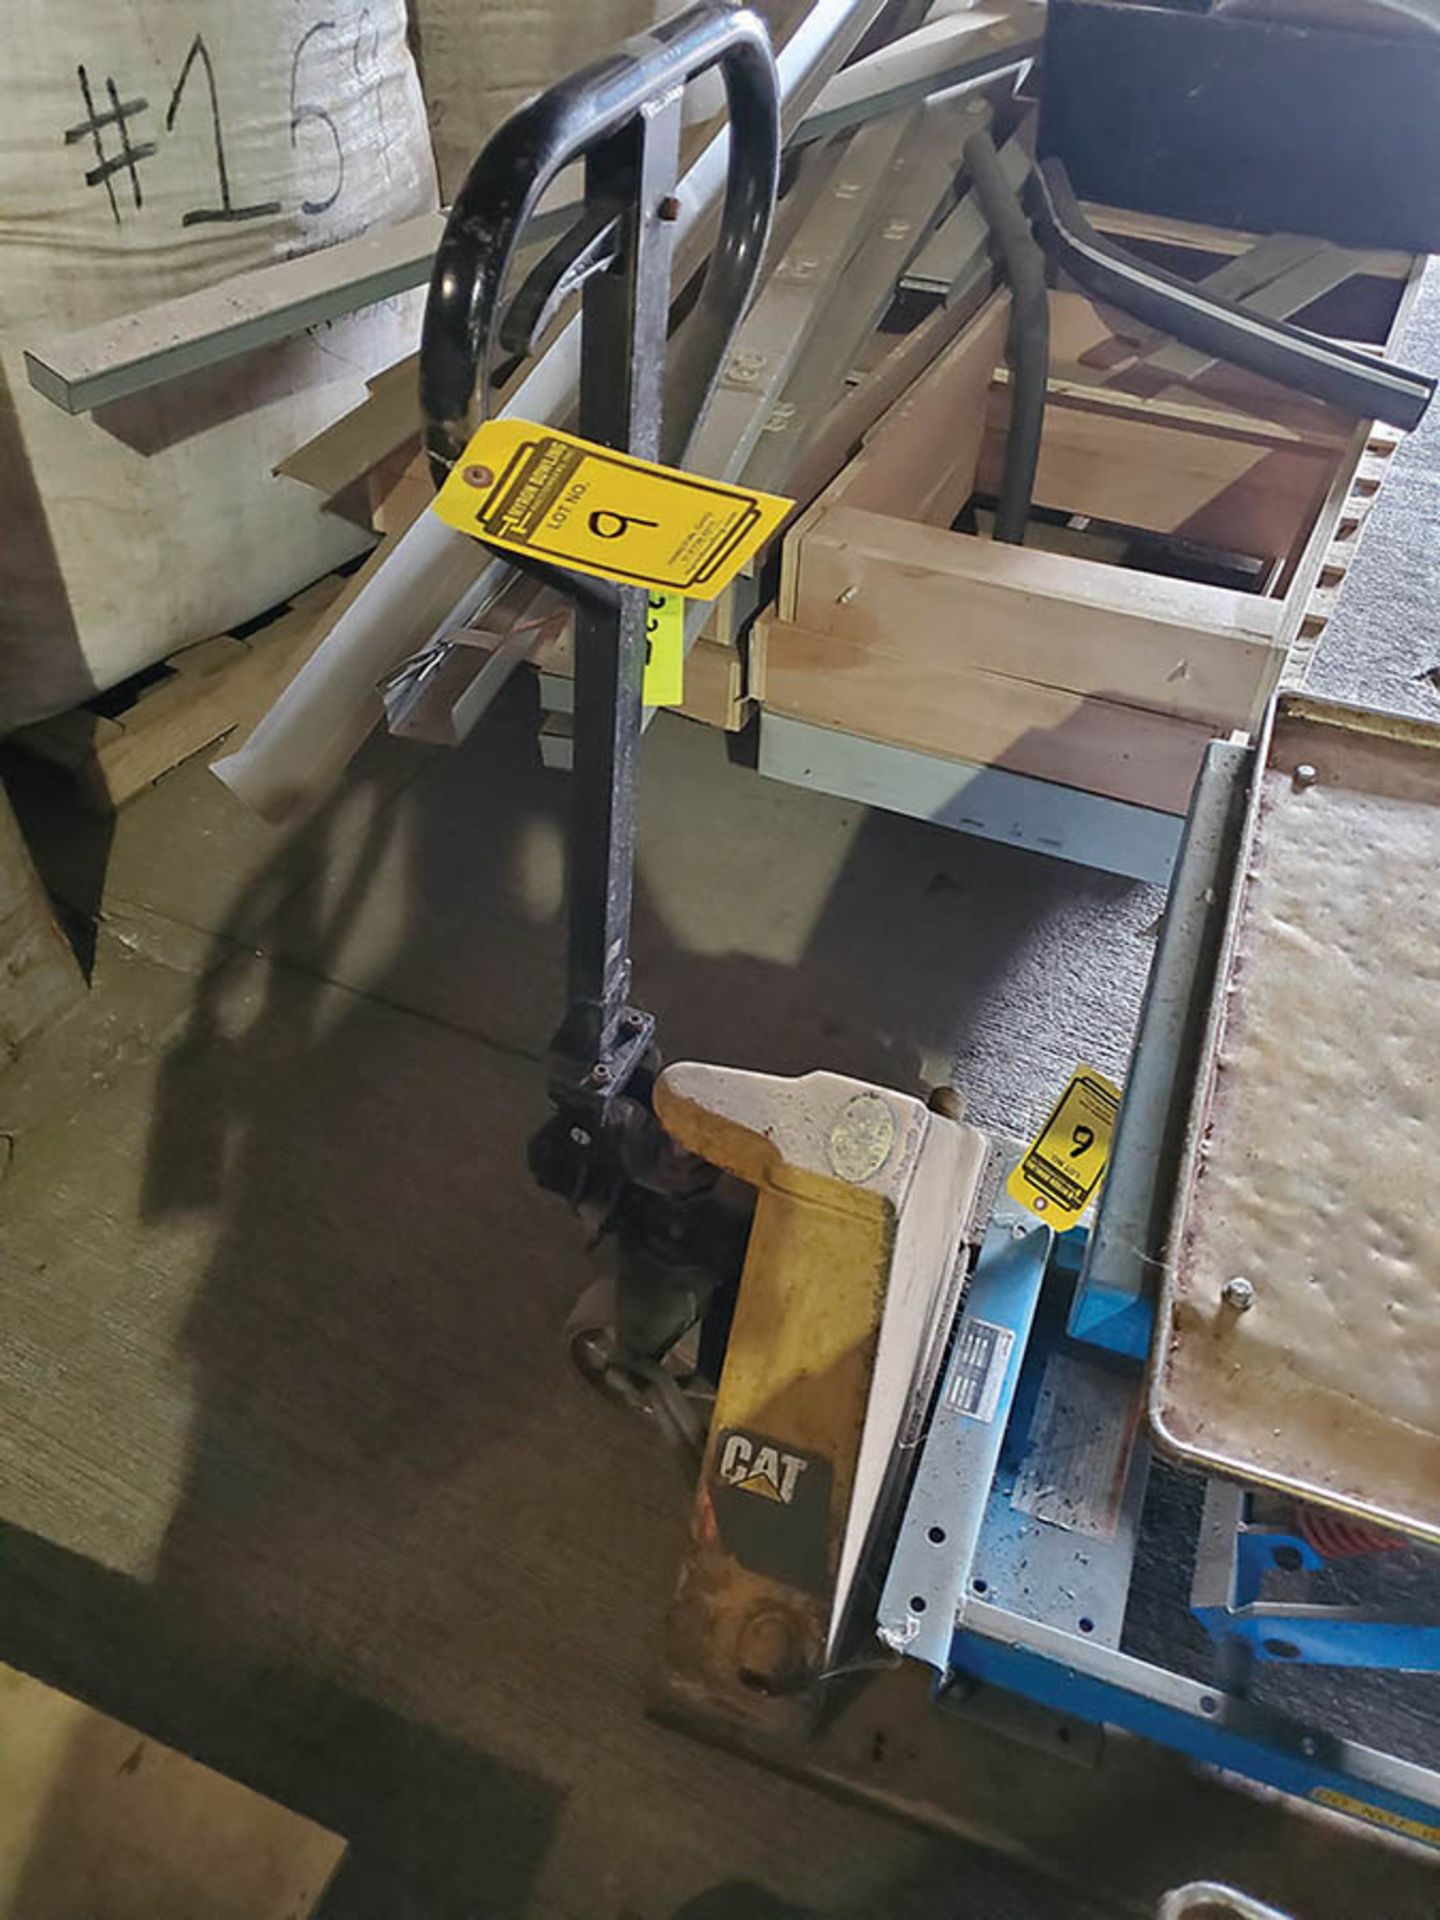 CATERPILLAR 5,500 LB HYDRAULIC PALLET JACK (NO TABLE) - Image 4 of 4